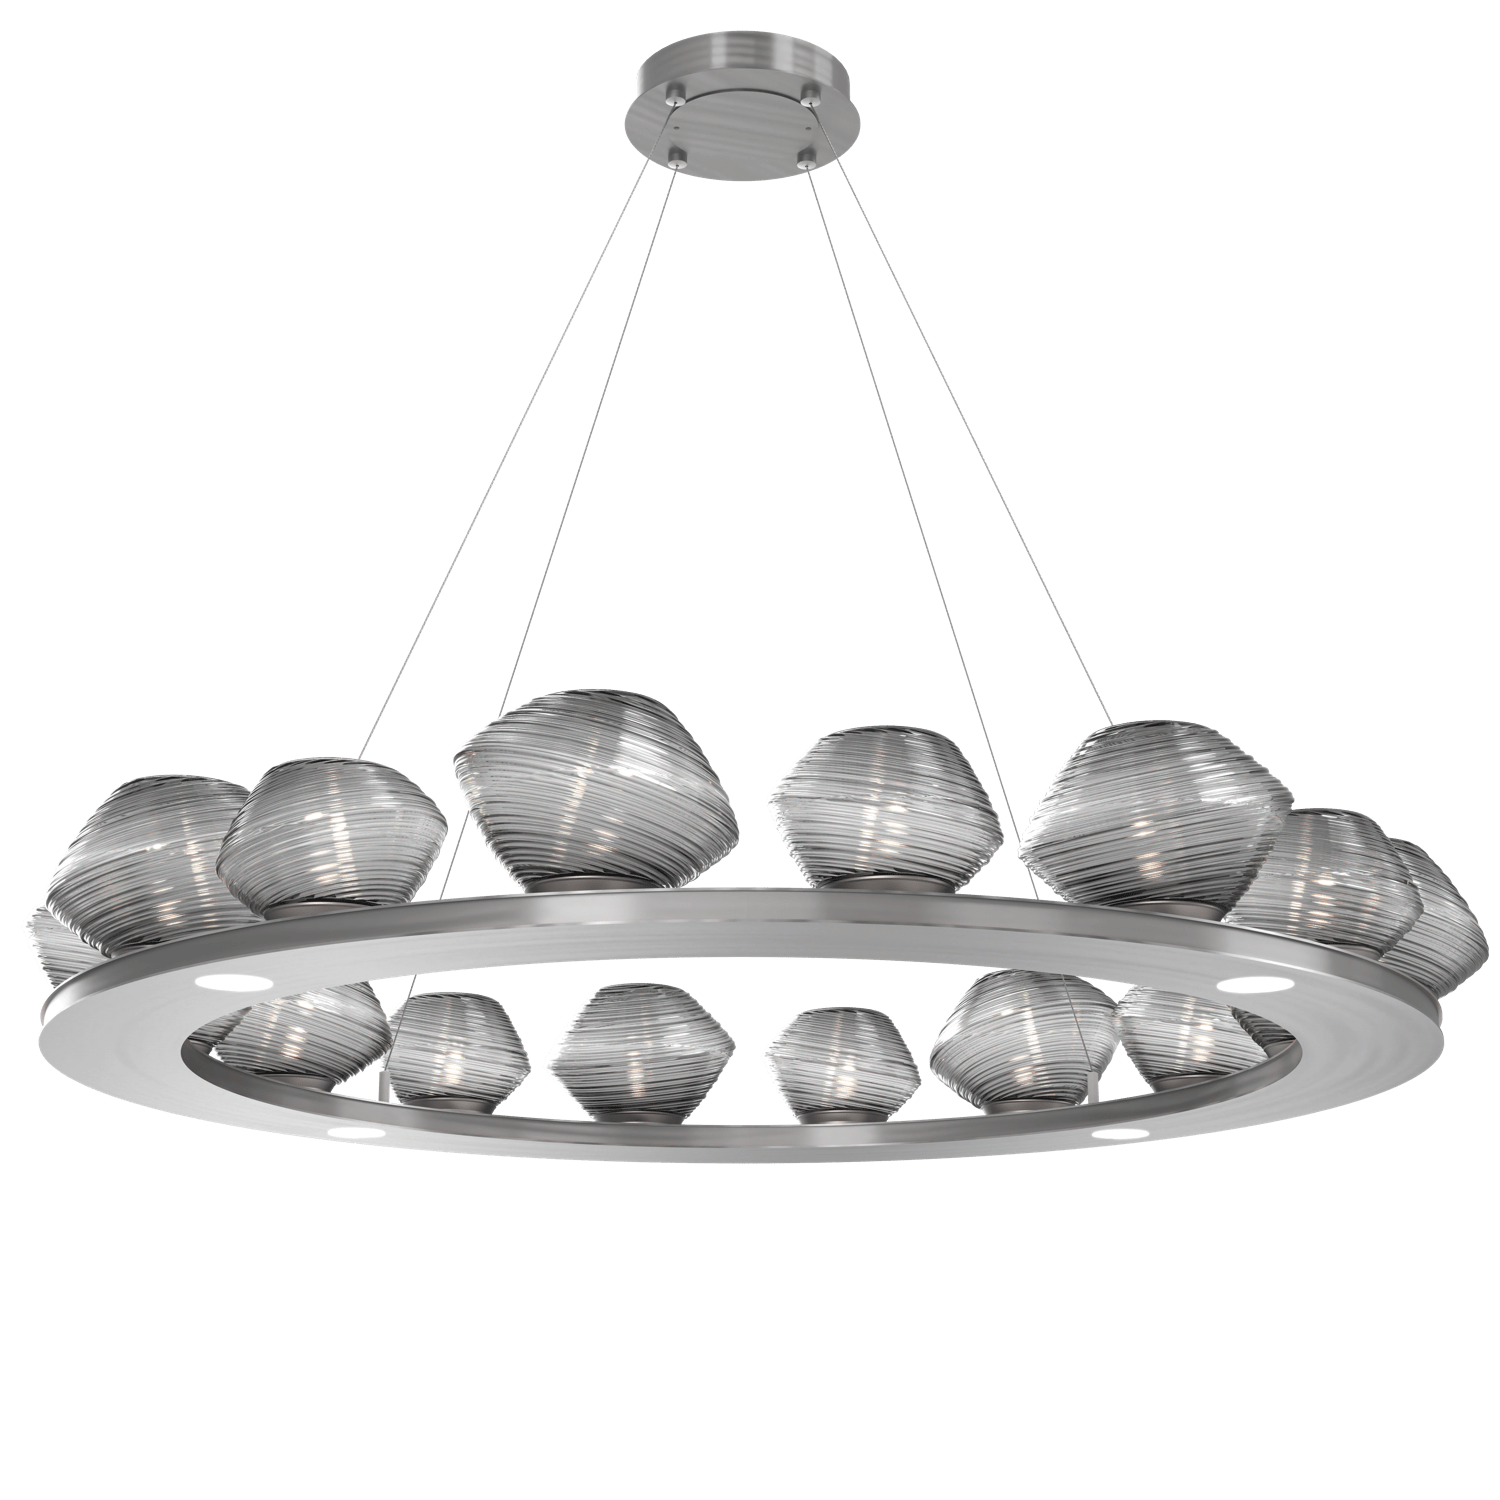 CHB0089-0D-SN-S-Hammerton-Studio-Mesa-48-inch-ring-chandelier-with-satin-nickel-finish-and-smoke-blown-glass-shades-and-LED-lamping